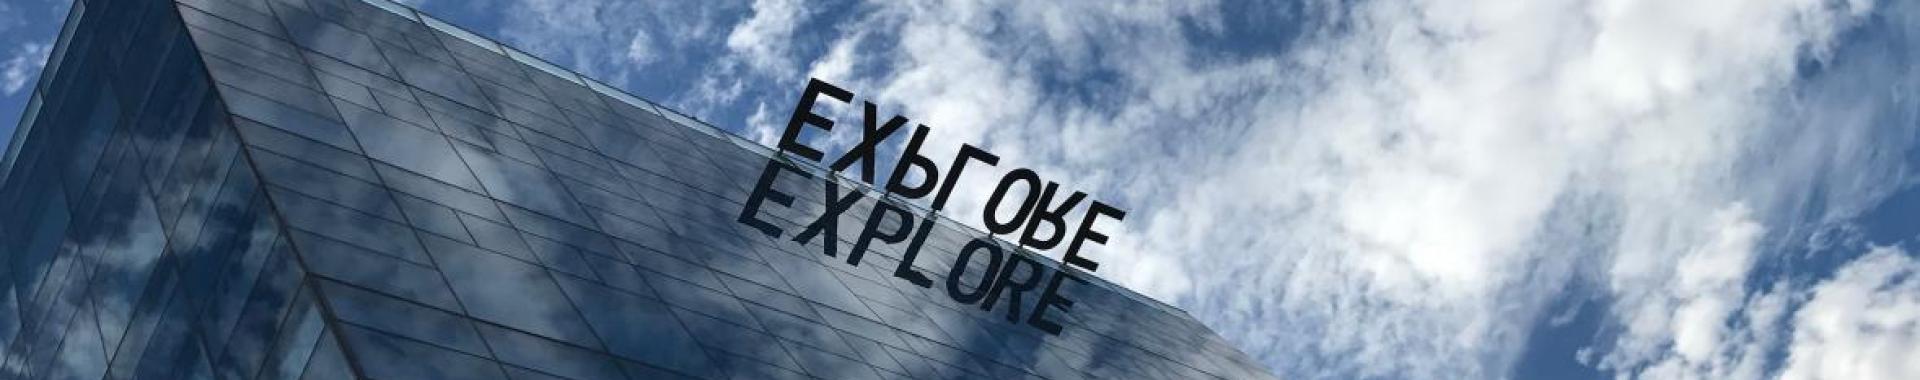 ASU' Tempe campus Coor building windows relecting the "Explore" sign and blue skys with white clouds. 